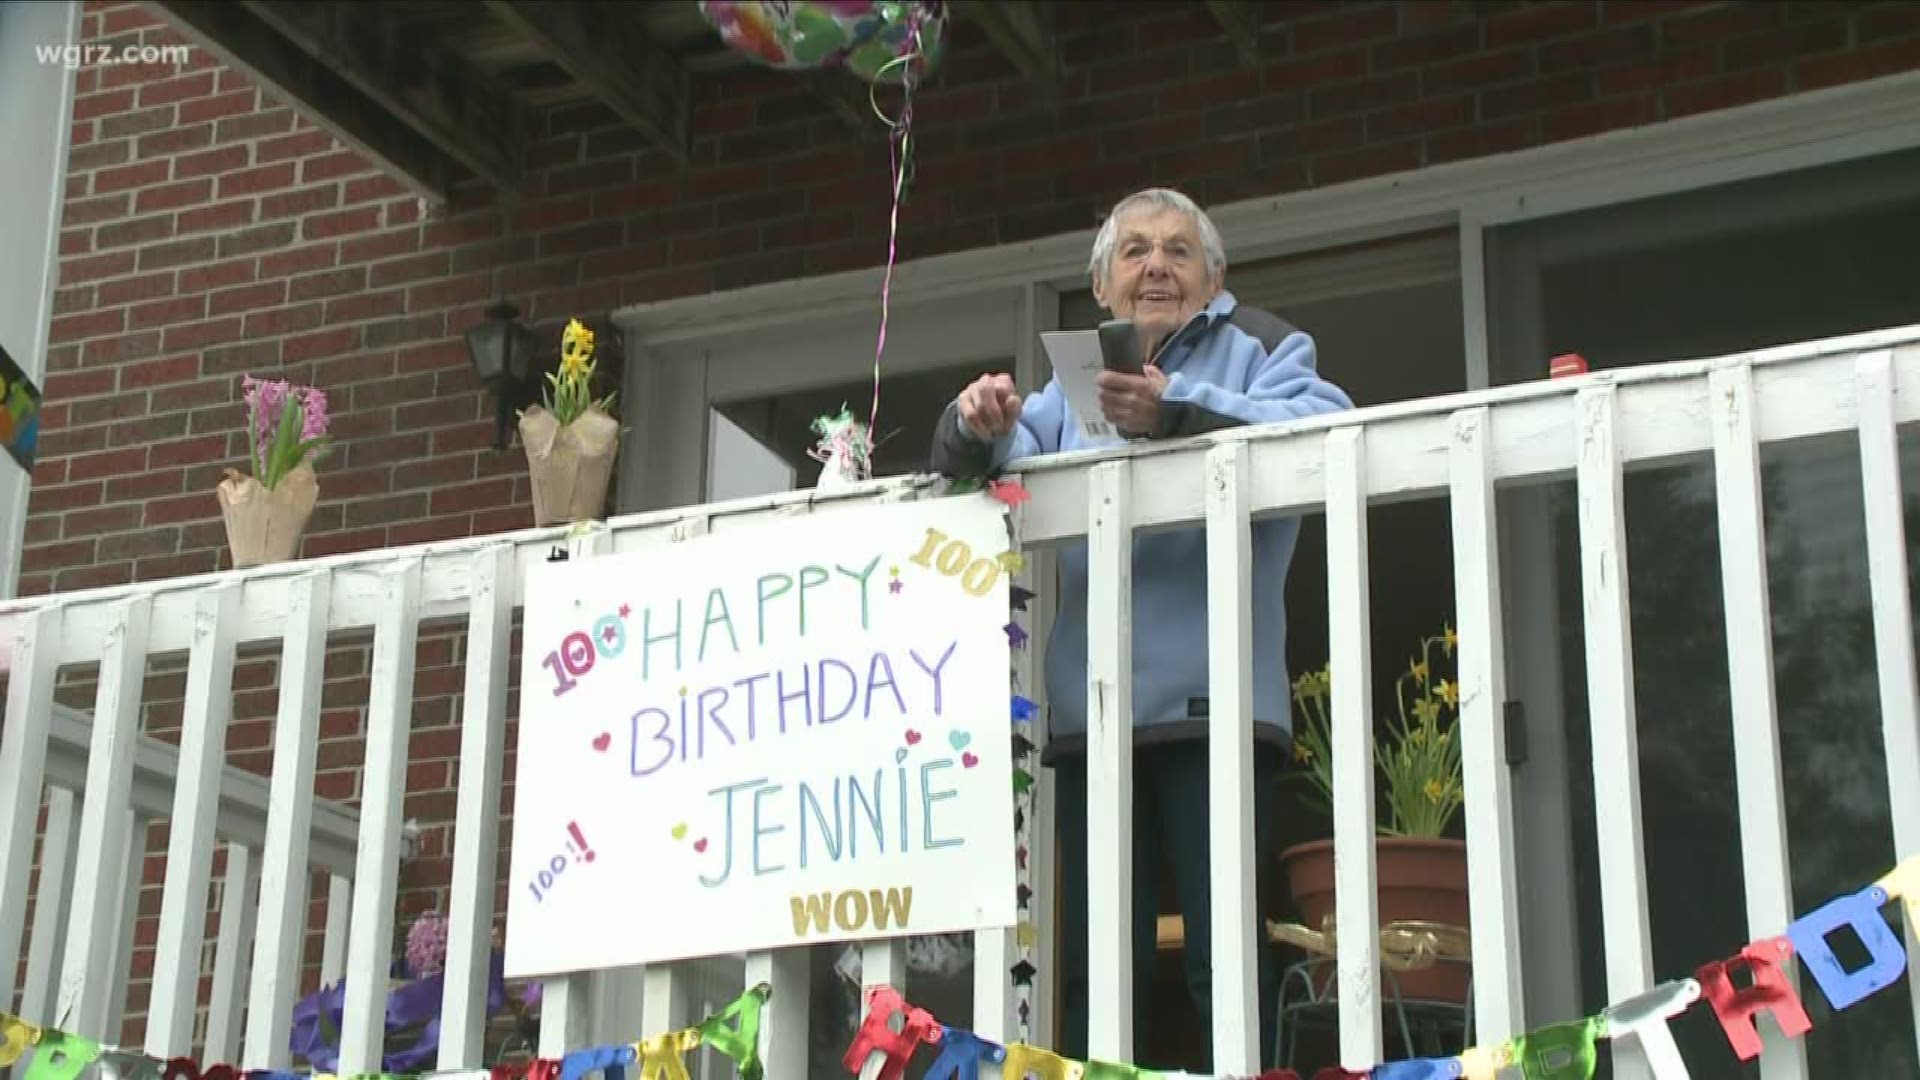 So her friends and co-workers from Millard Fillmore Hospital where she volunteers - came by her porch with a parade today to wish her a happy birthday...